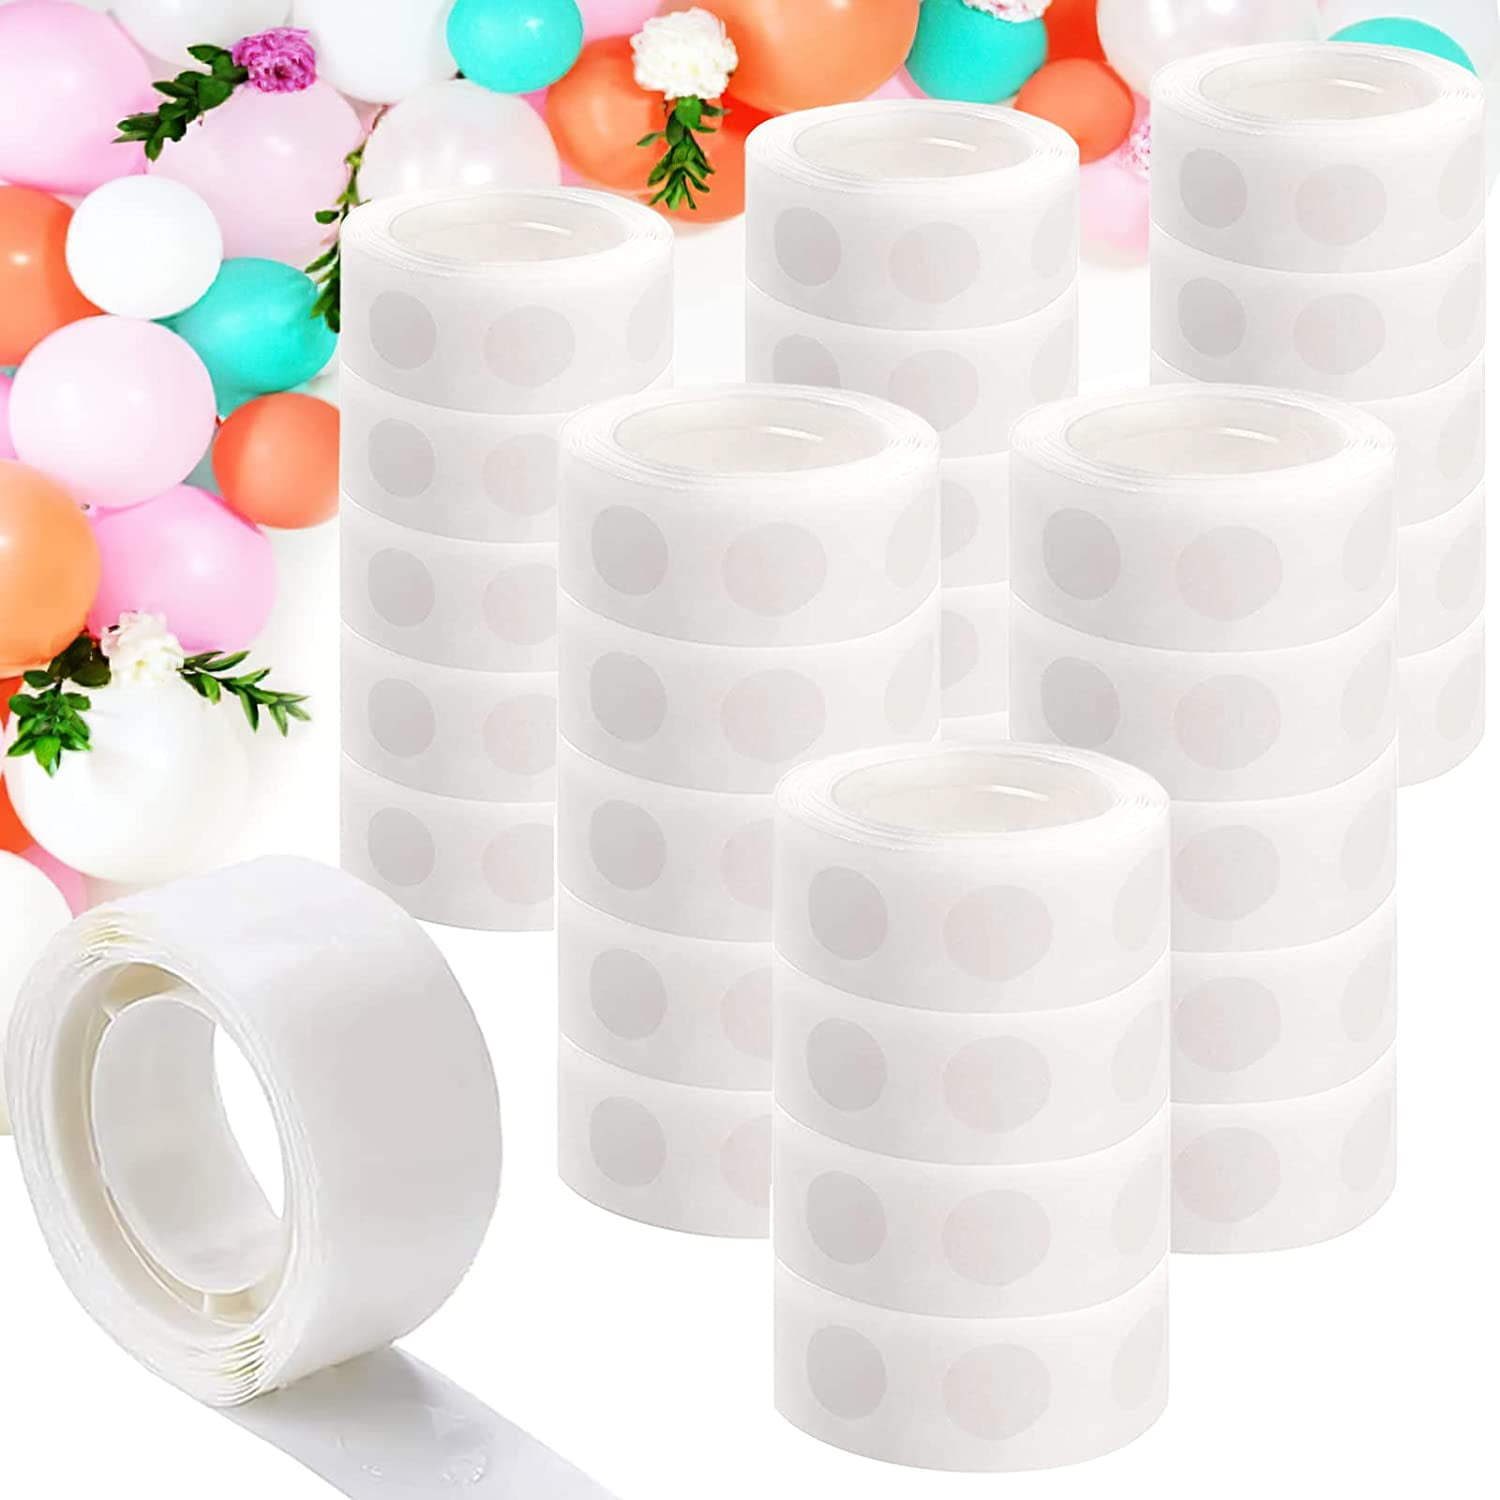 Balloon Glue Point 300/900 Pcs (3/9 Rolls) Balloon Tape Strip of Glue Craft  Removable Adhesive Point Tape